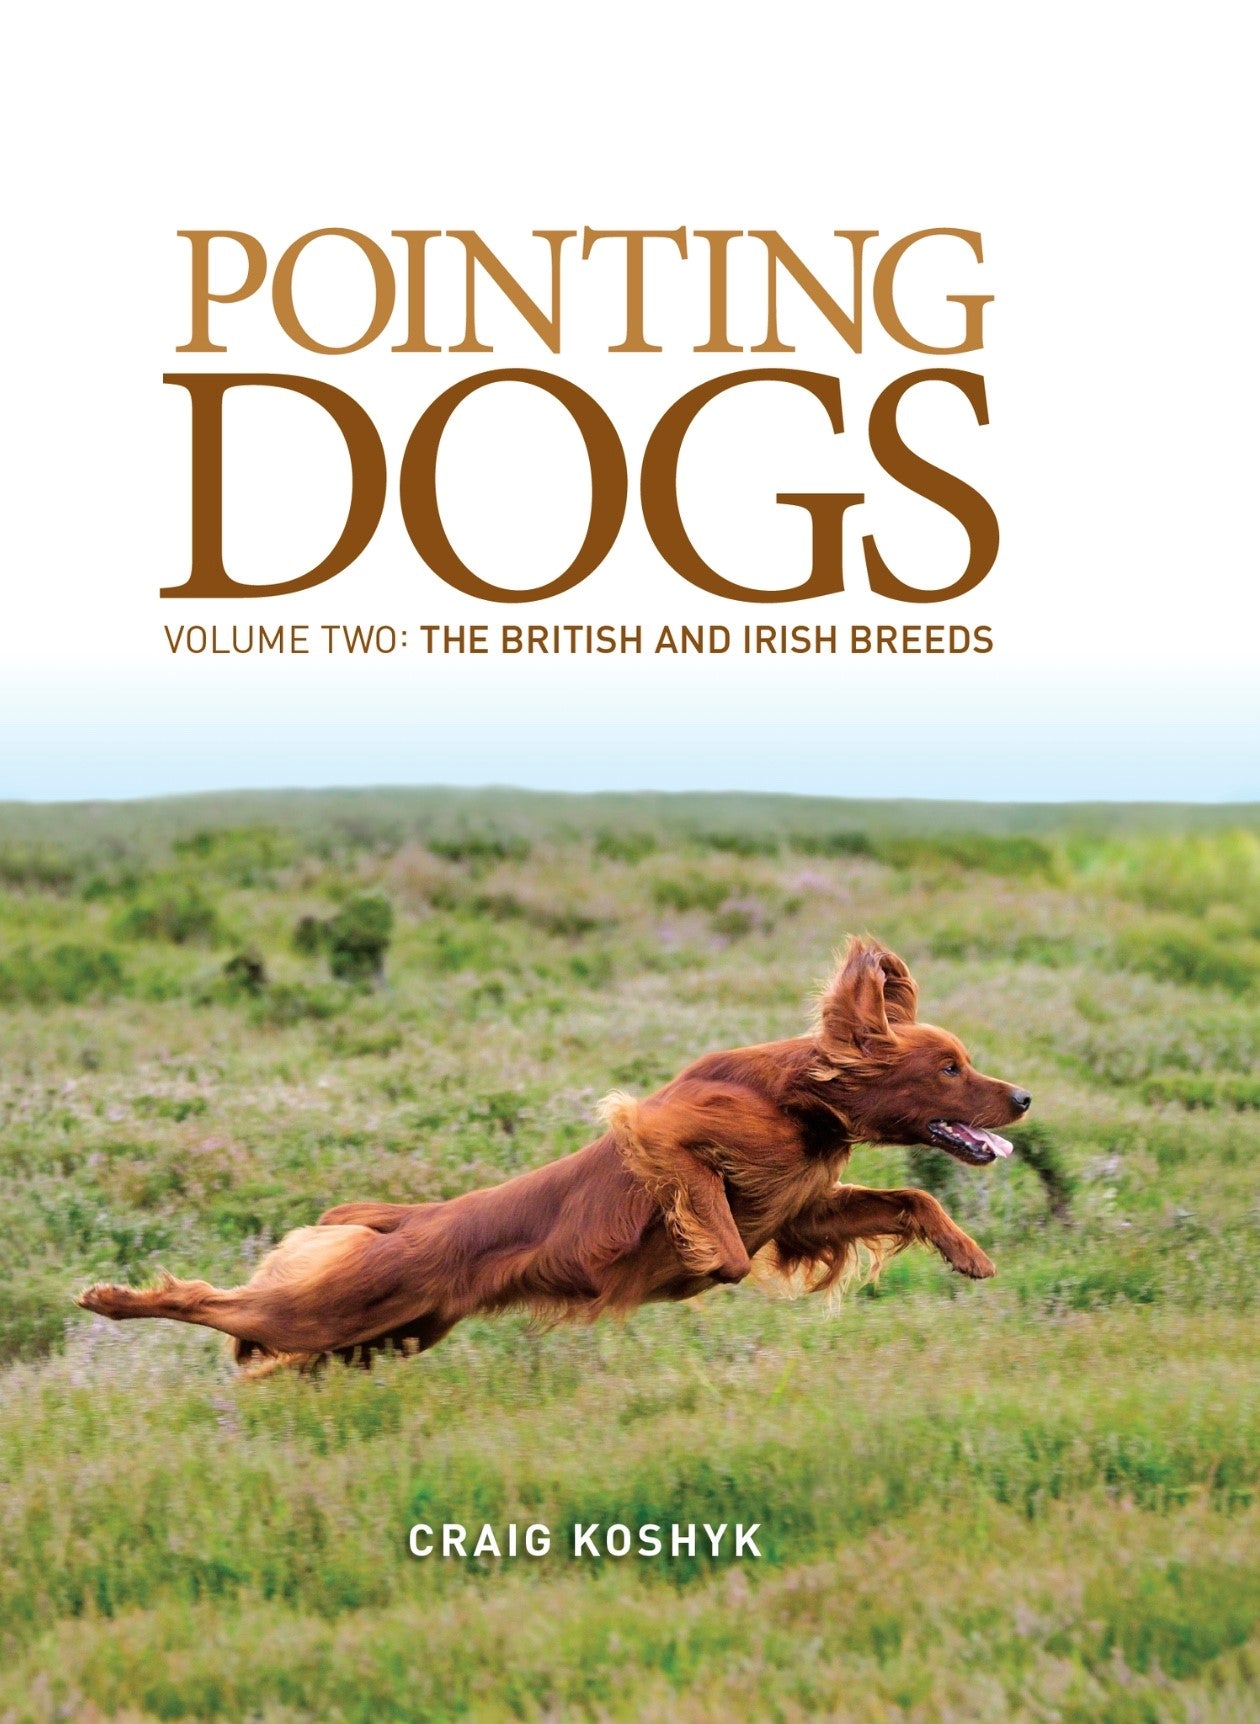 Pointing Dogs, Volume Two: The British and Irish Breeds